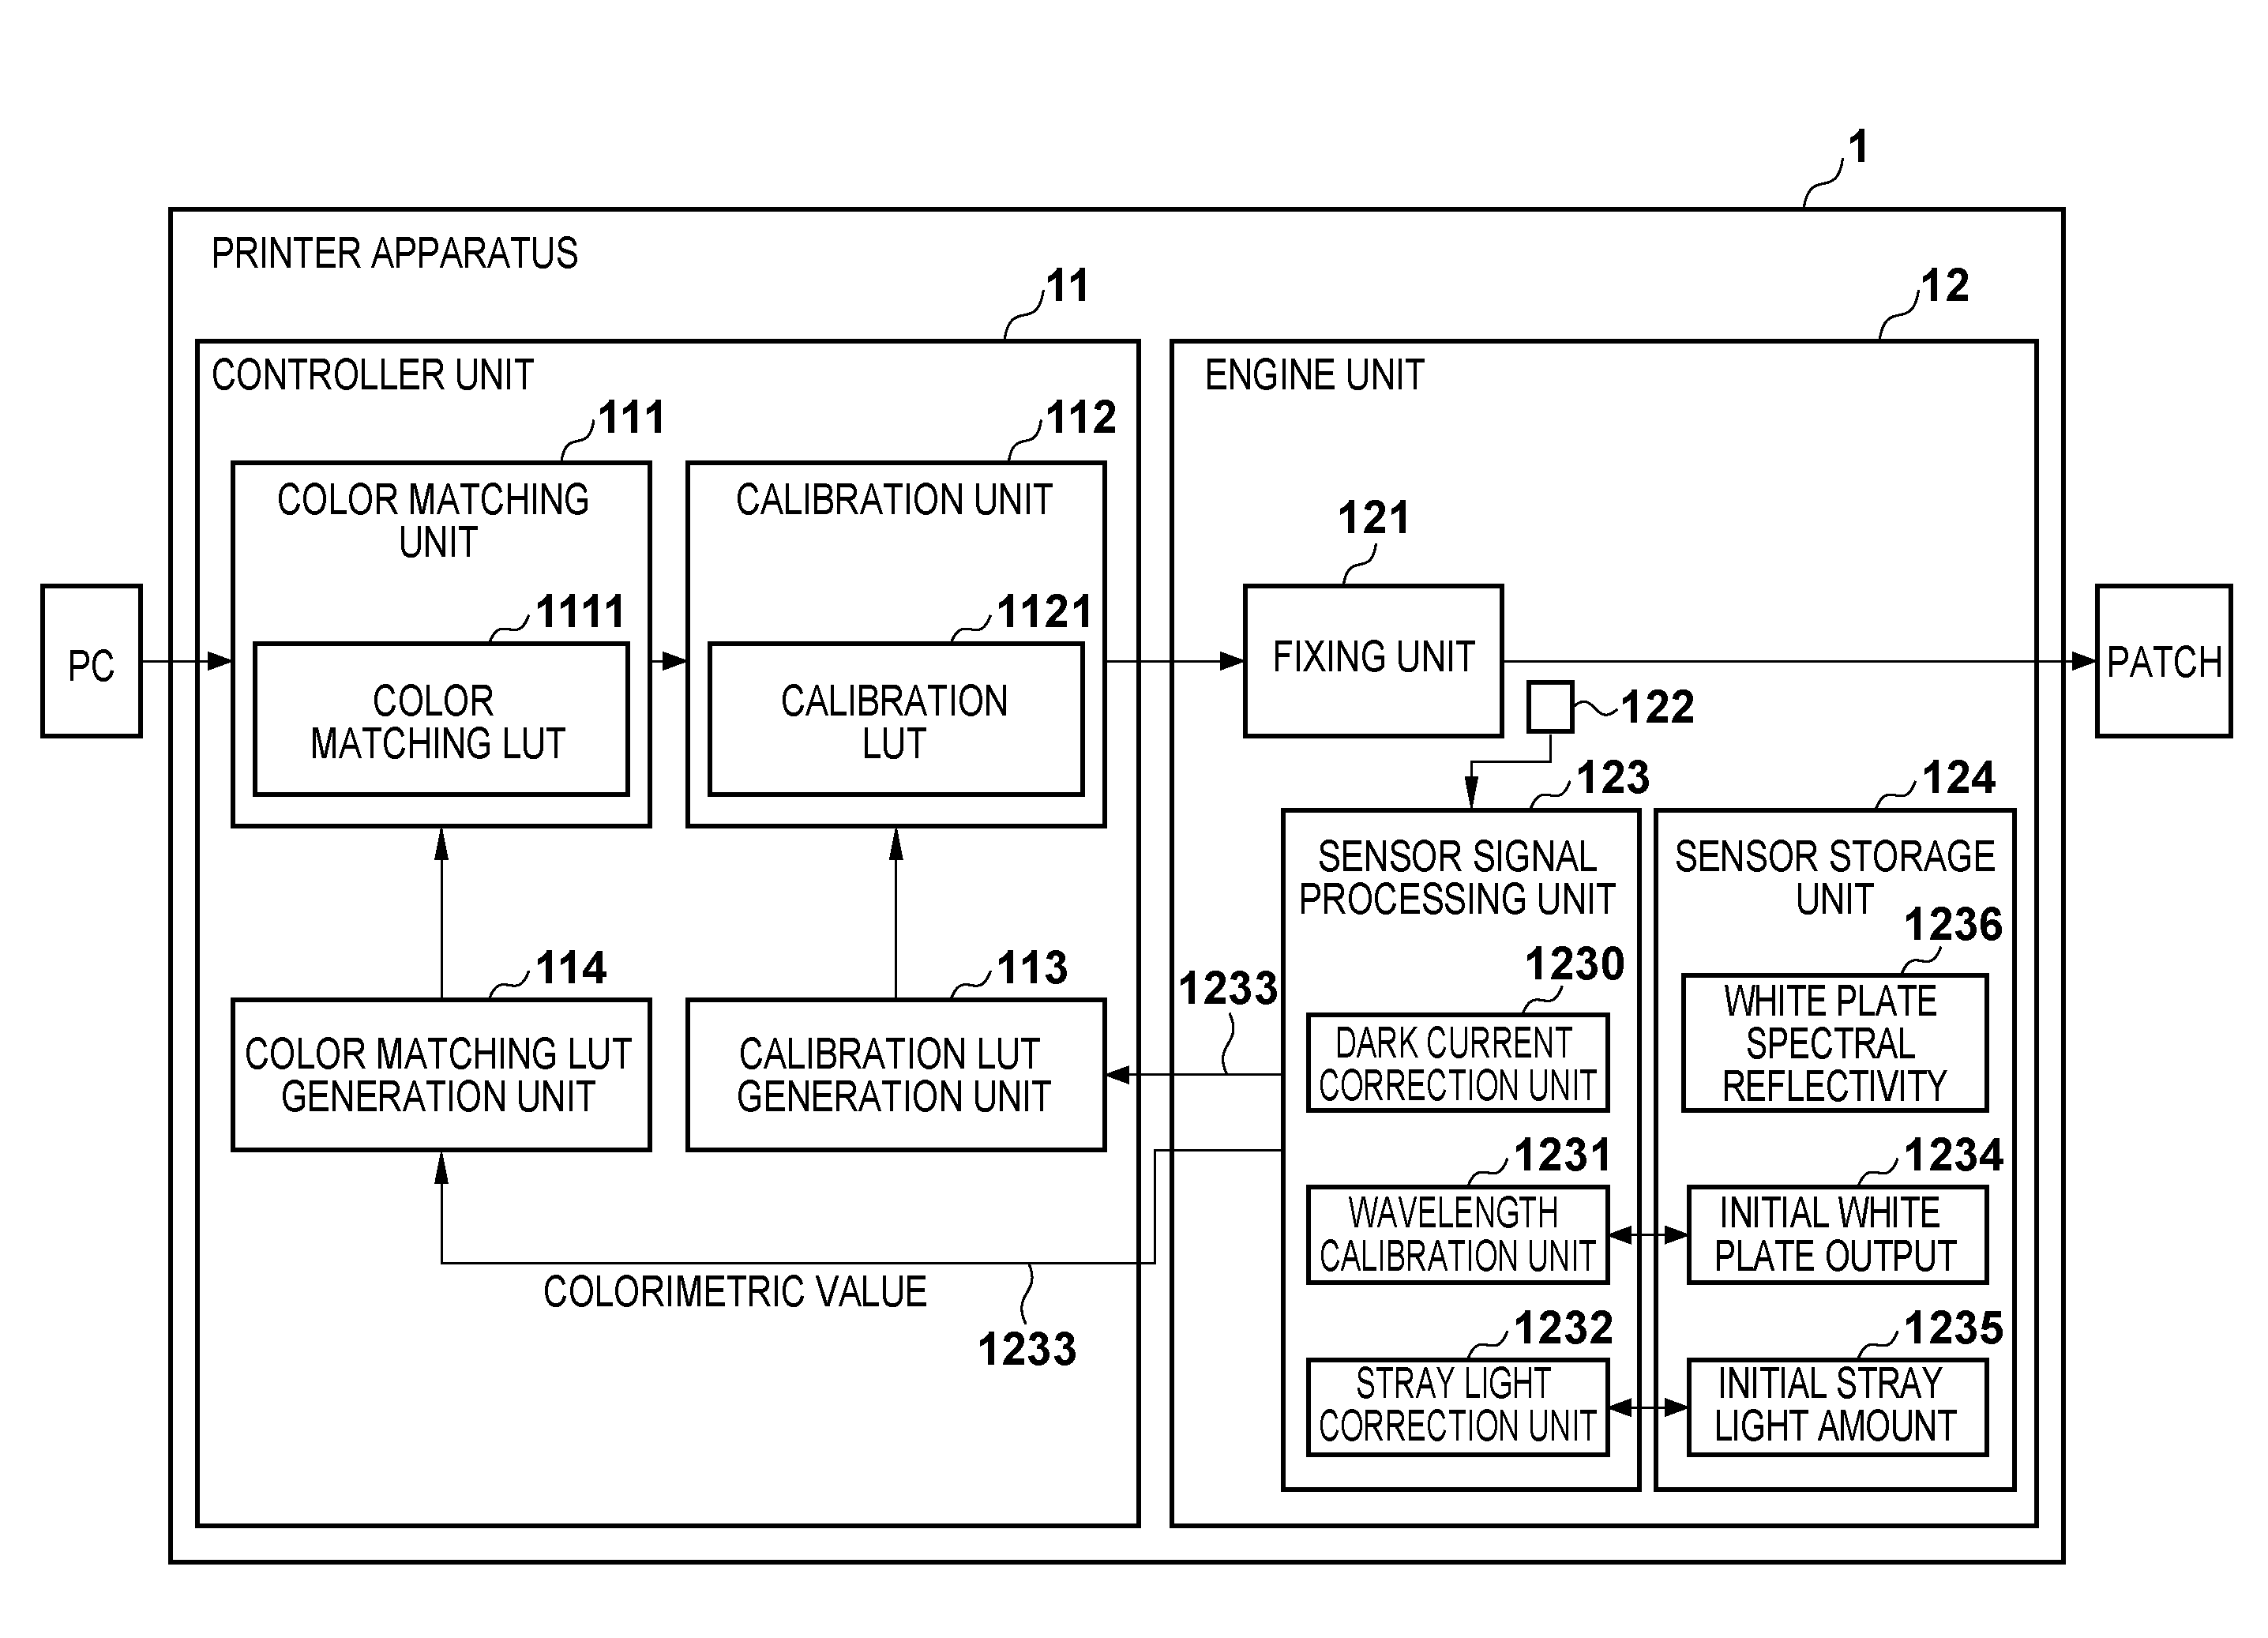 Spectral color sensor and image forming apparatus